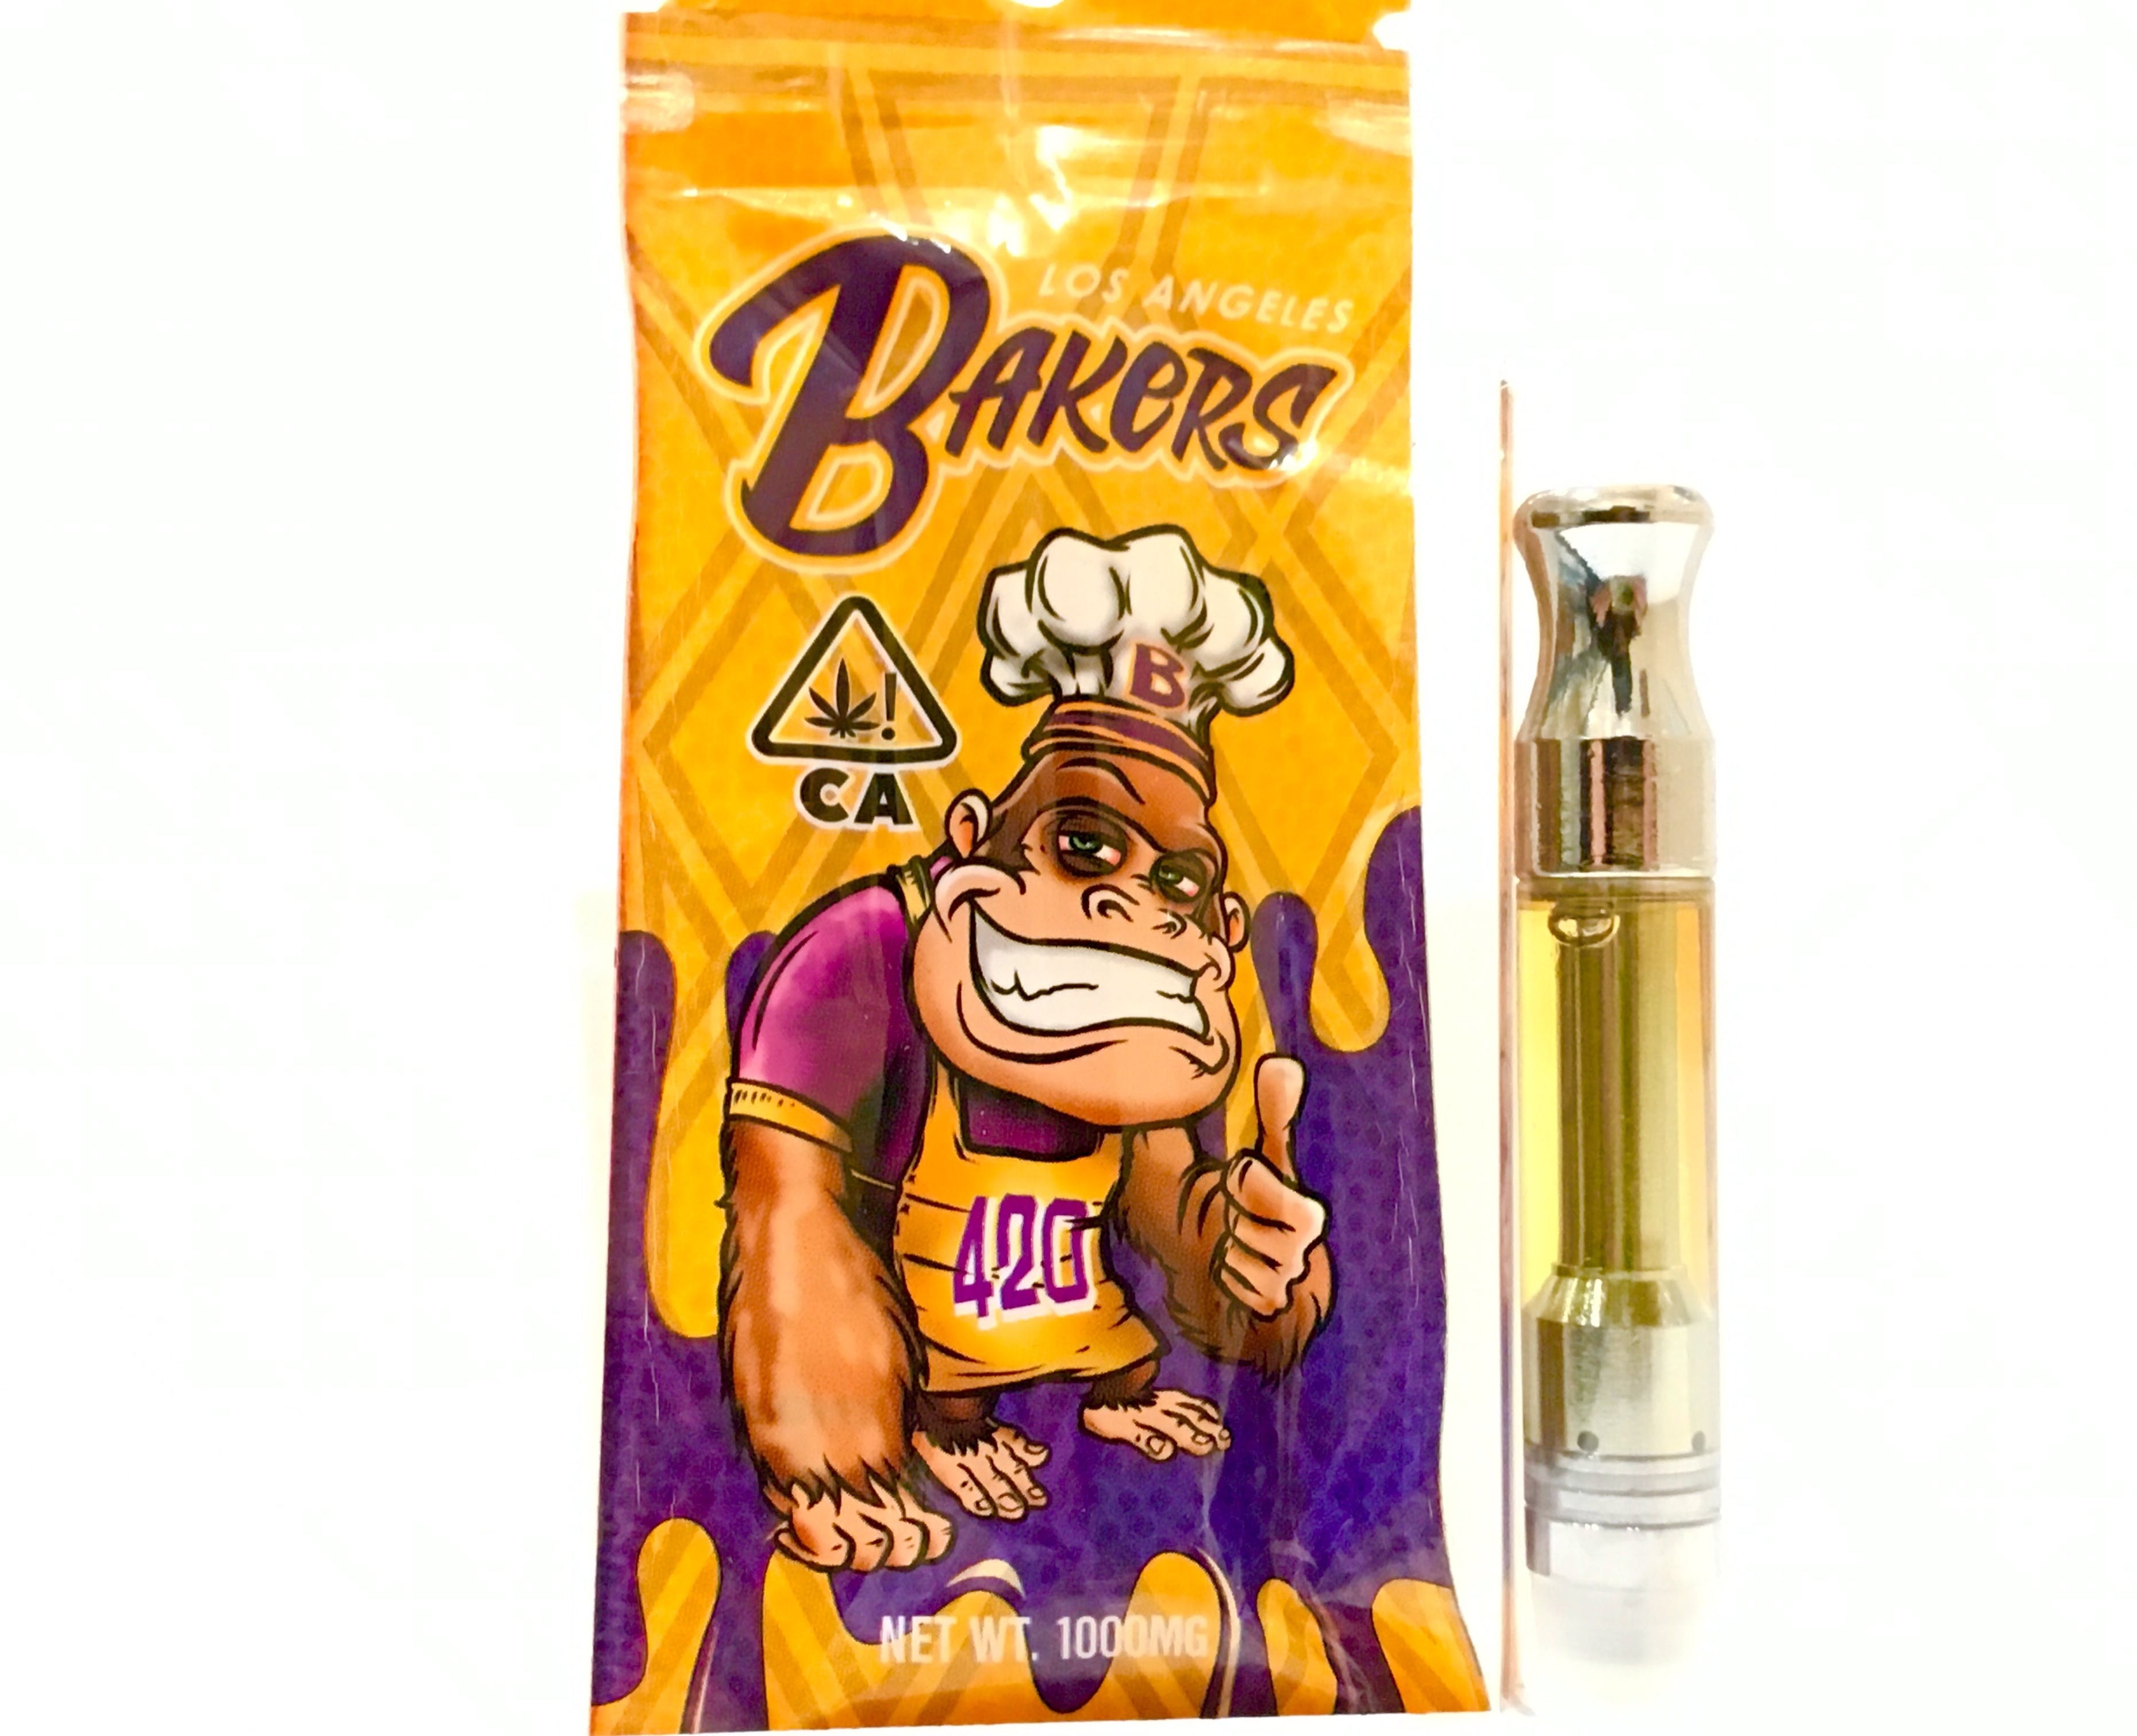 concentrate-bakers-1g-cartridge